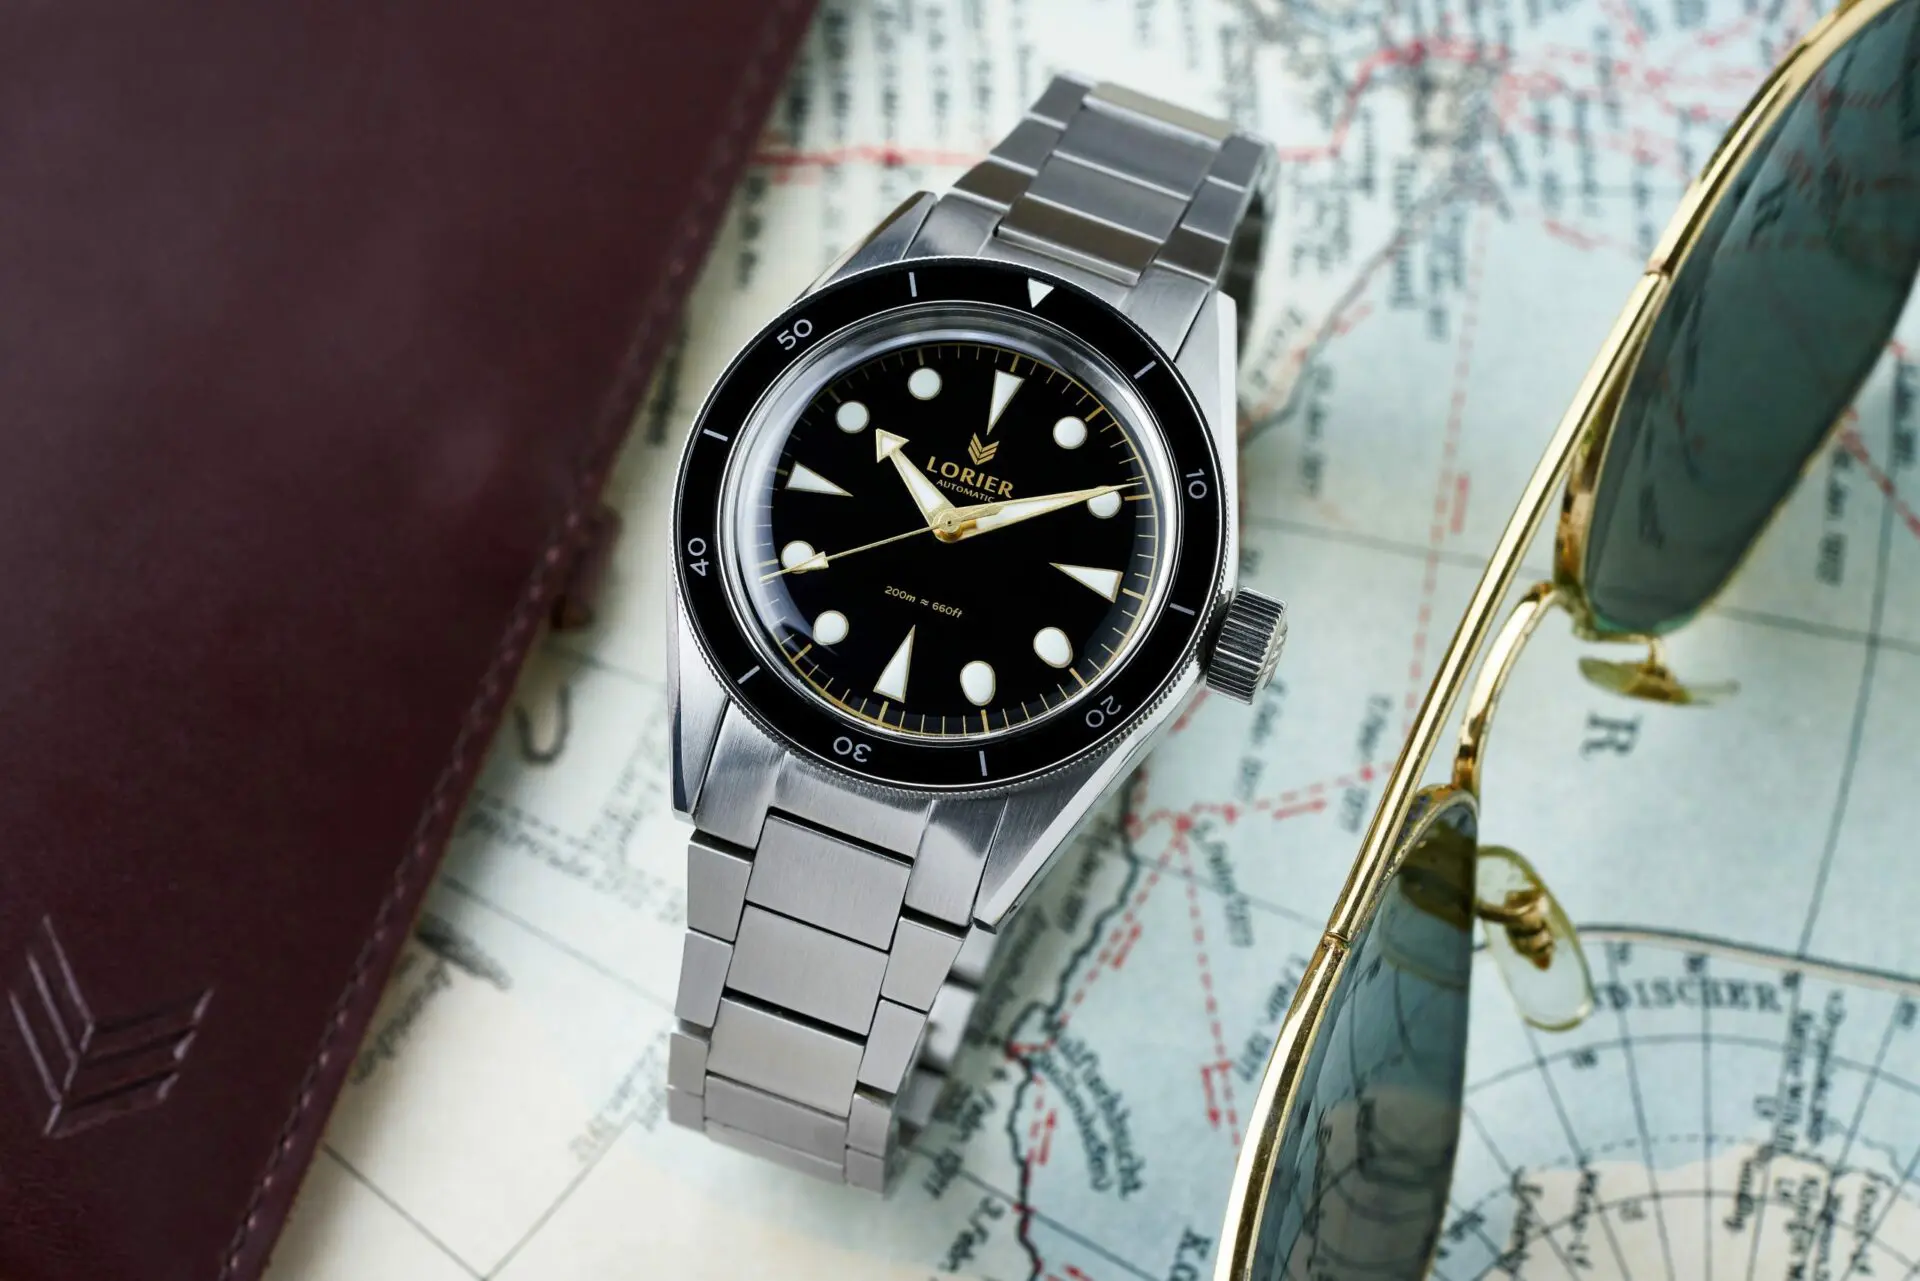 10 great value watches under $1000 you're likely to spot at get-togethers  in America – Part 2 - Time and Tide Watches